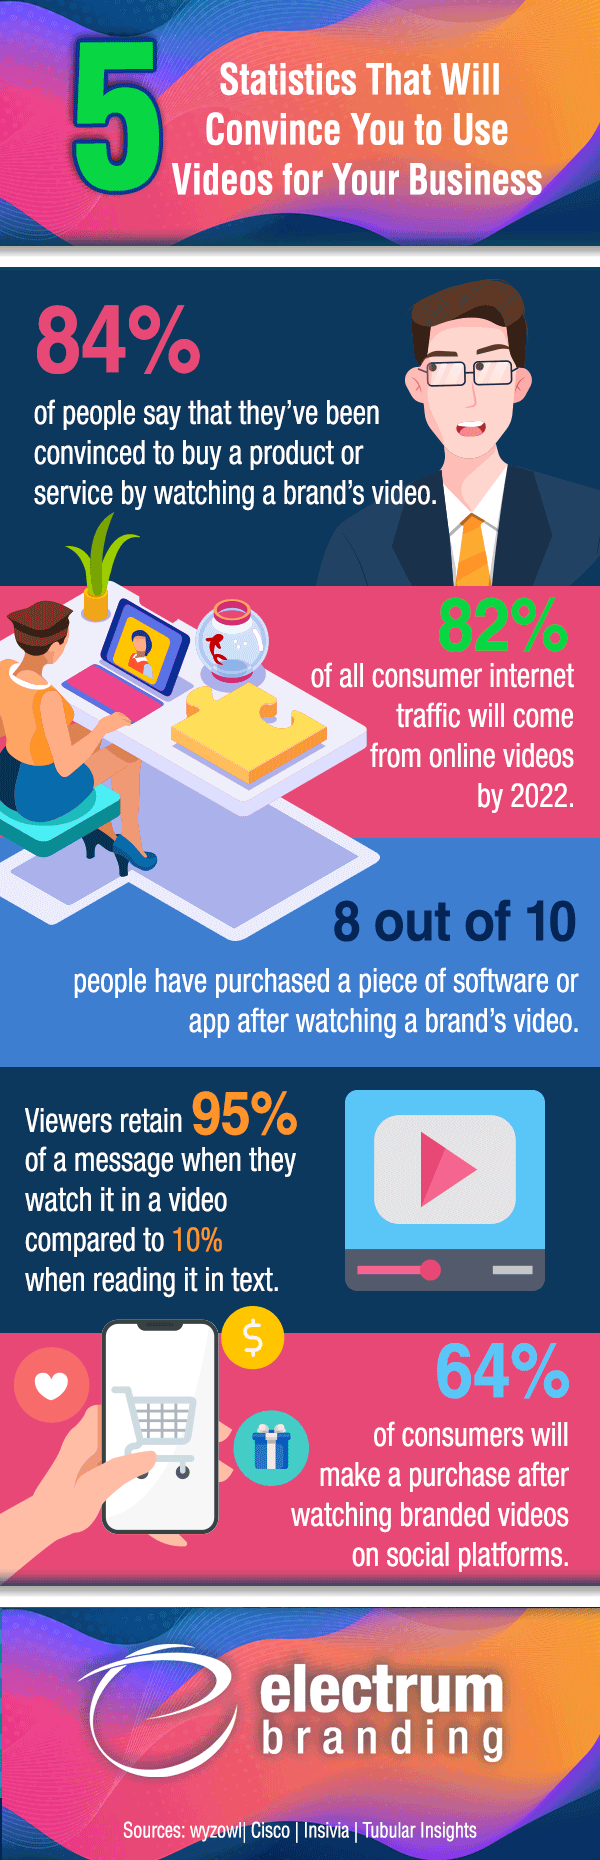 Five Statistics That Will Convince You to Use Videos for Your Business - Infographic